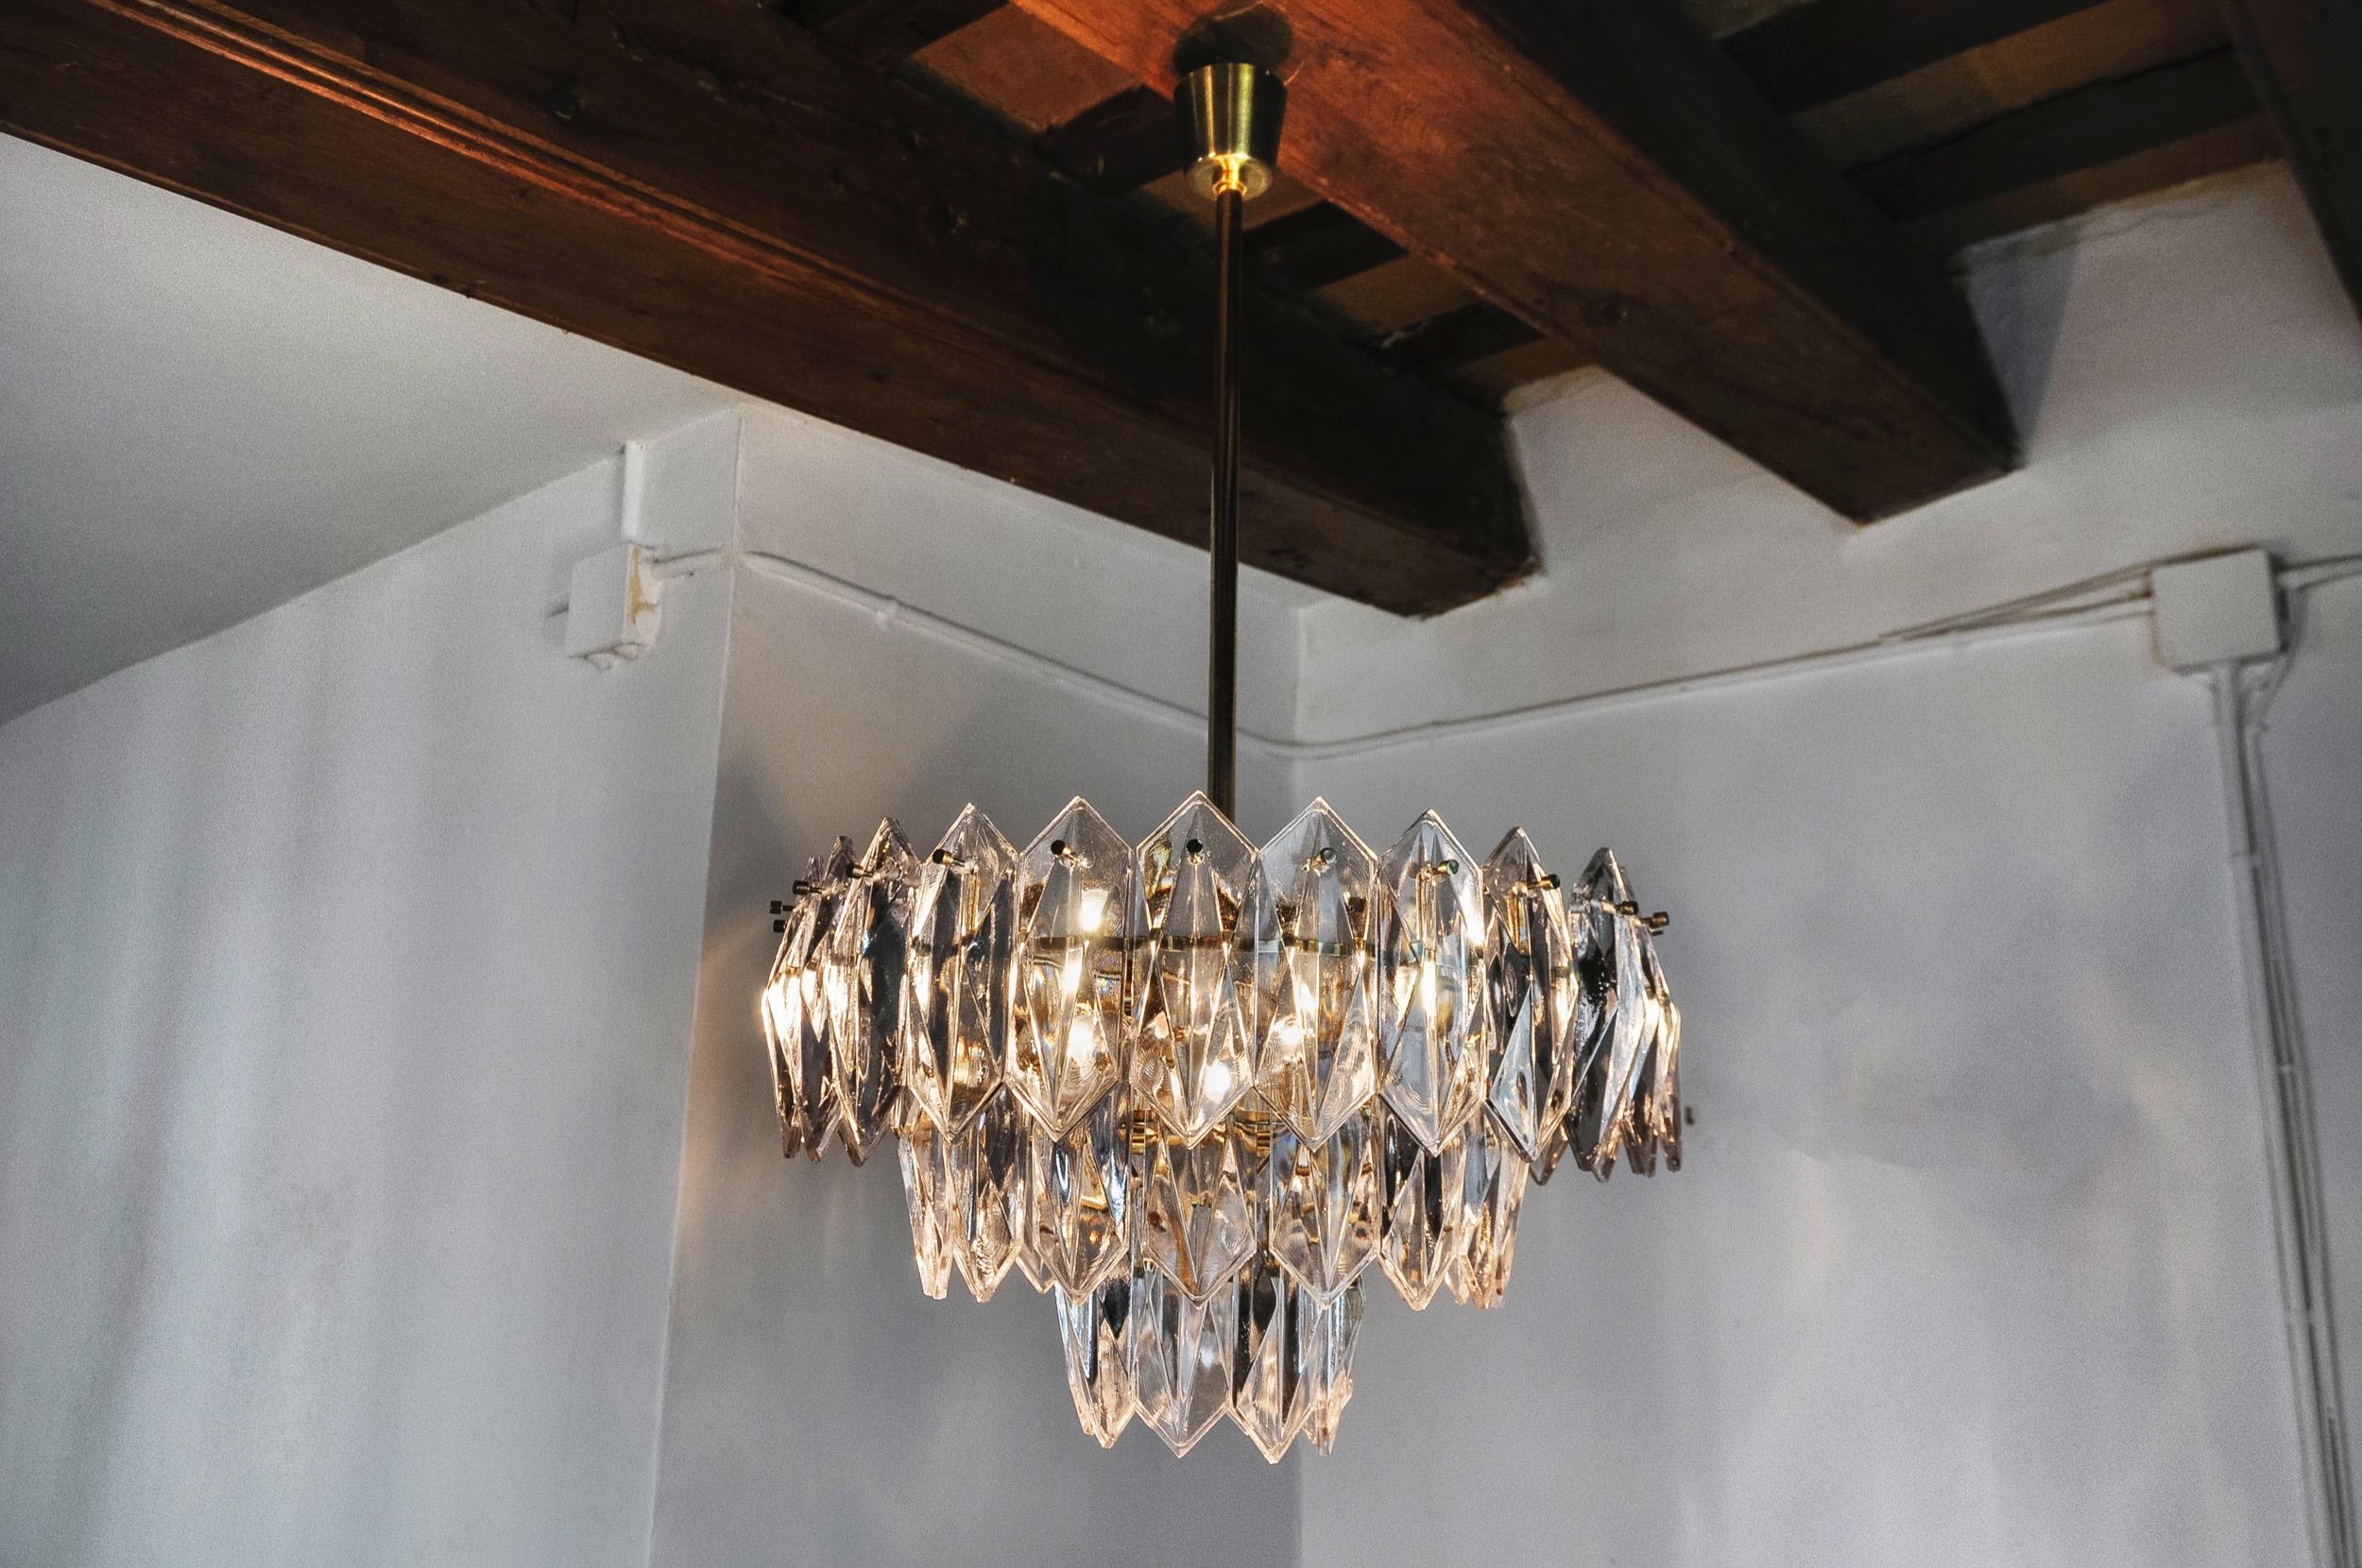 Superb and imposing glass chandelier designed and produced by j.t kalmar in austria in the 1970s.

Carved crystals spread over 3 levels of a gilded metal structure.

Unique piece will bring a real touch of design to your interior.

Verified